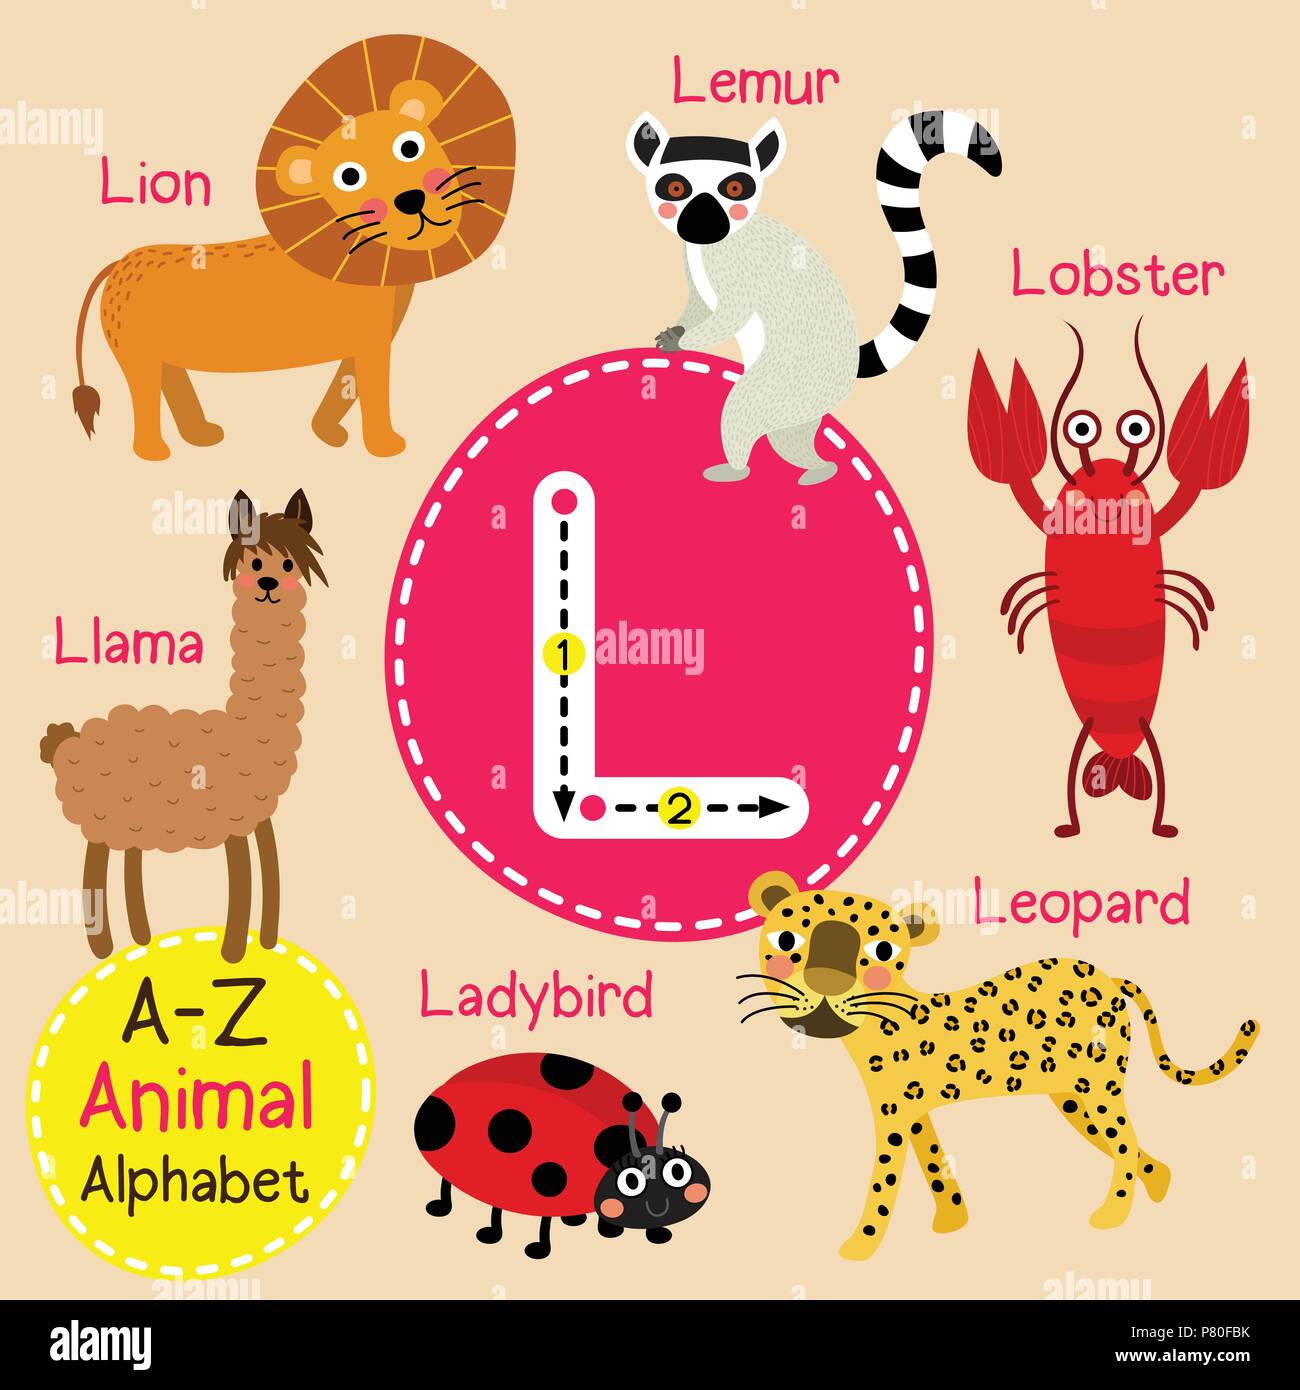 L animal Stock Vector Images - Alamy